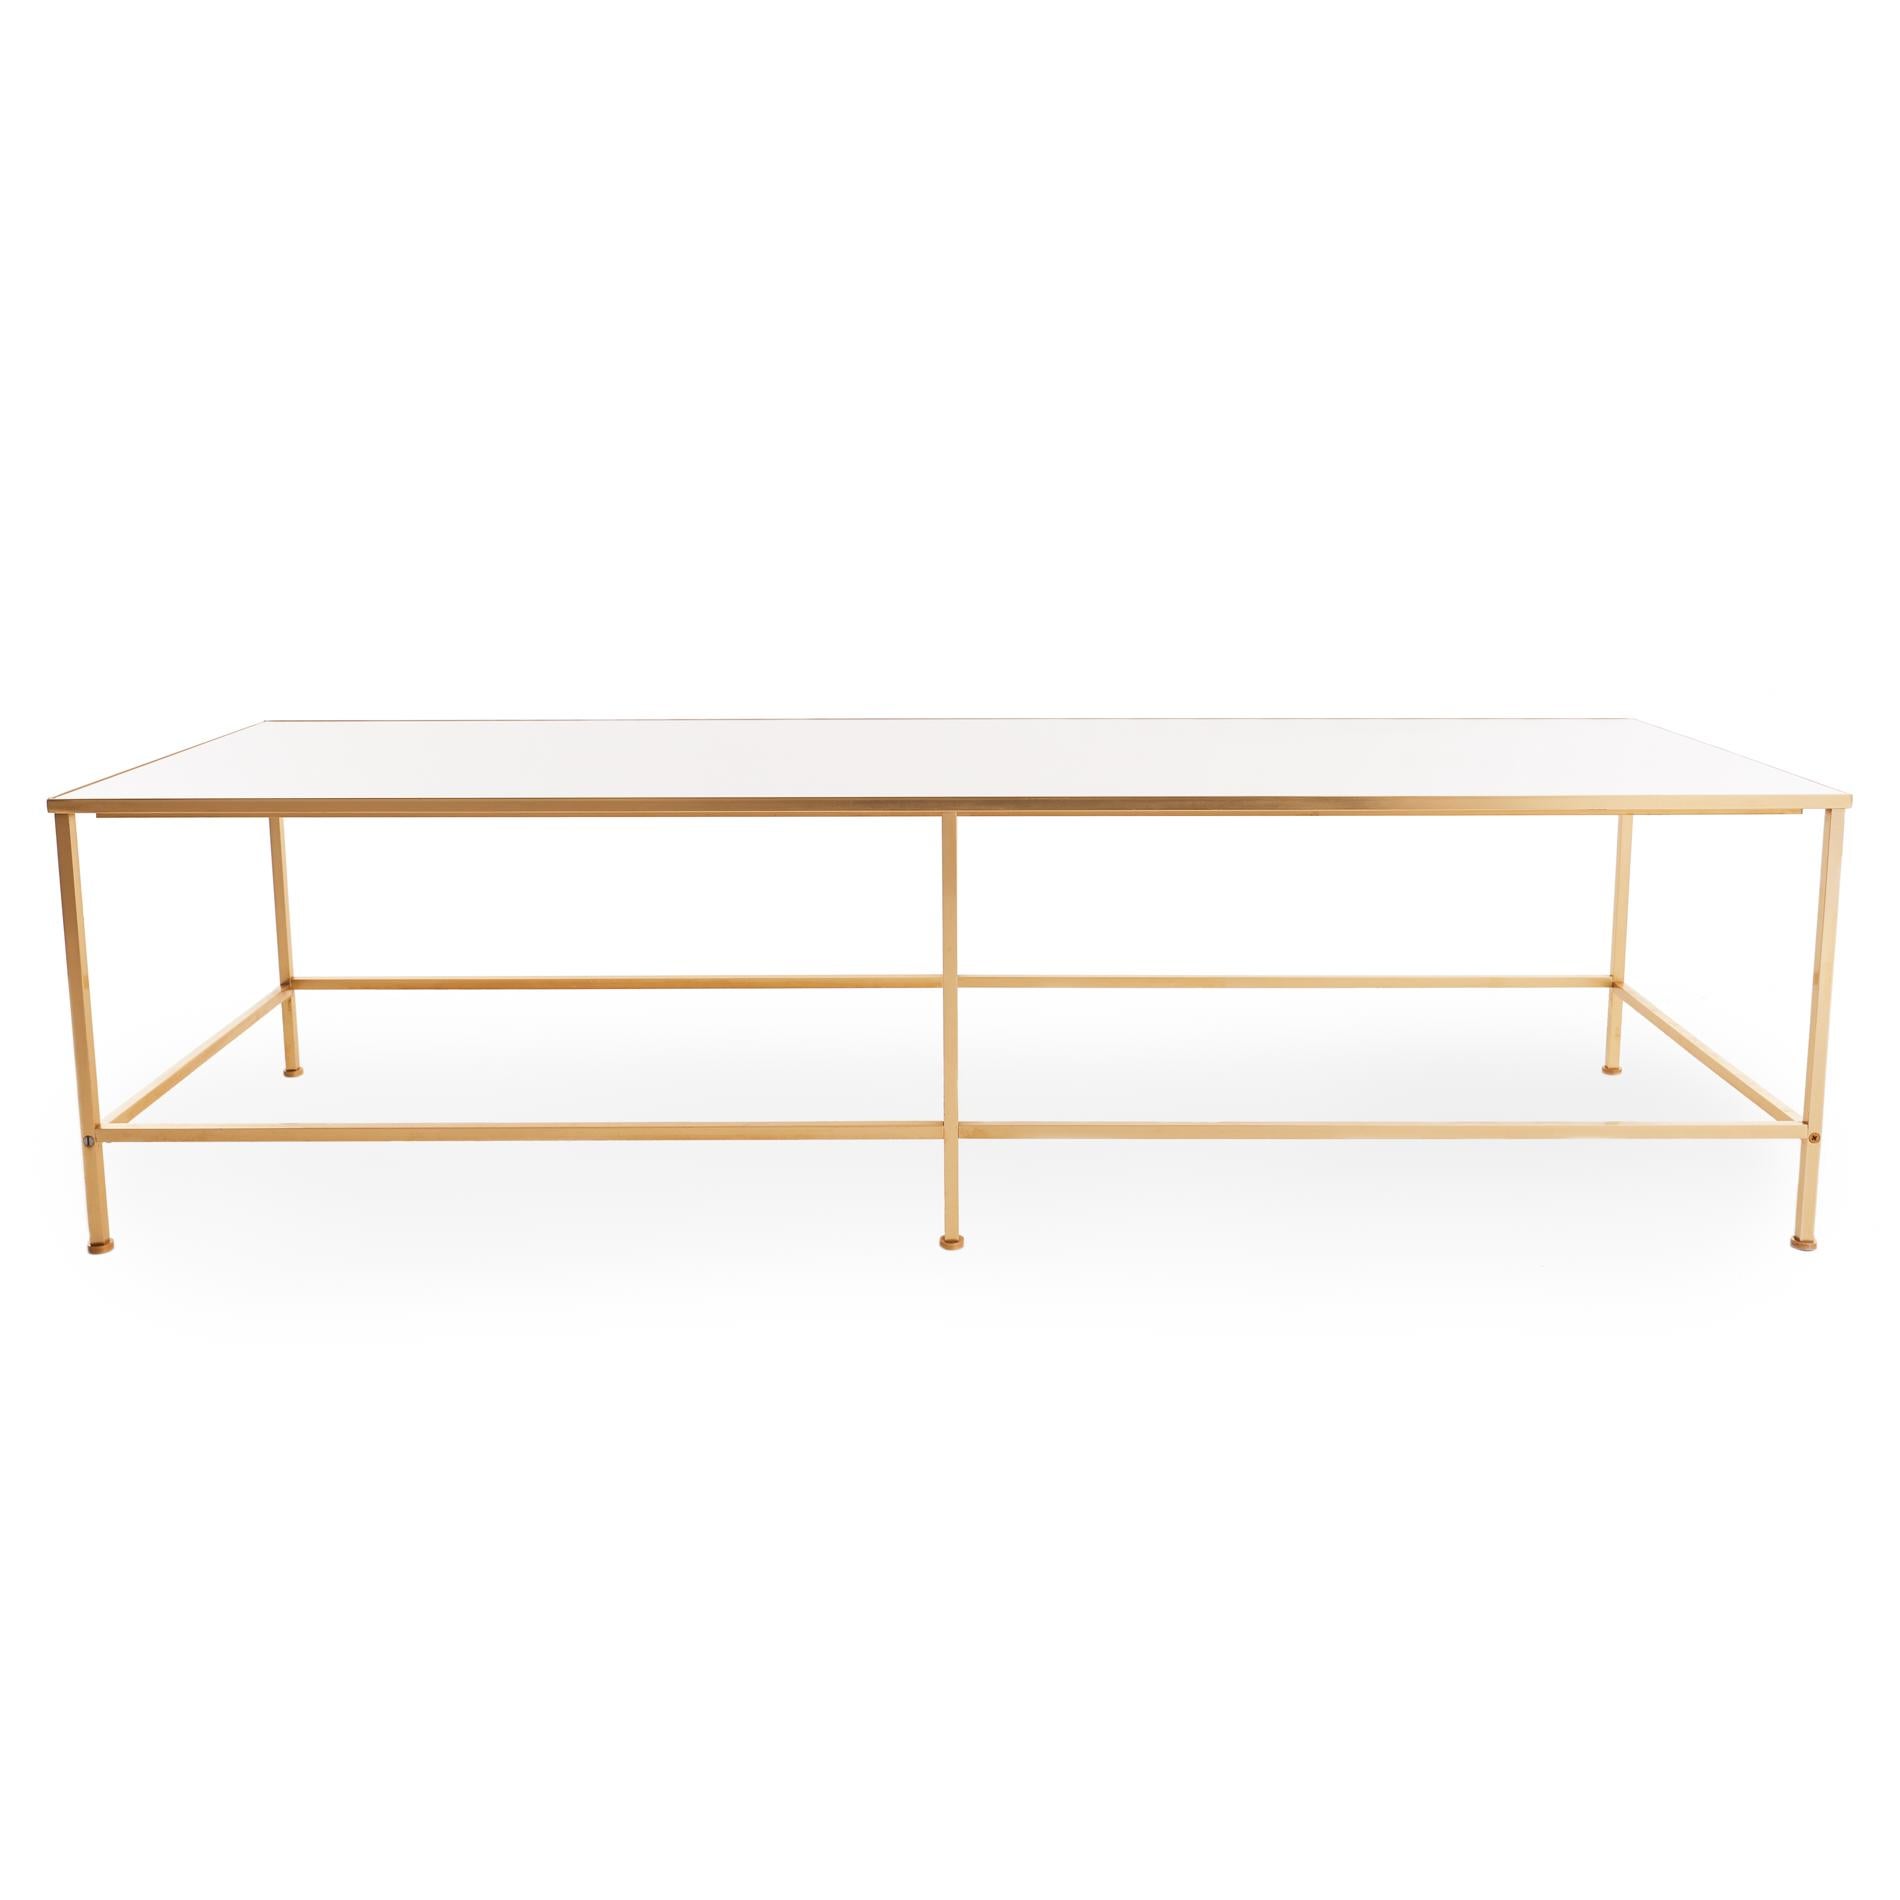 Sleek midcentury coffee table with substantial white vitrolite top inset into a brass frame, in the style of Harvey Probber. Overall in incredible shape, with a small hairline crack in one corner (see images).

Measures: 16